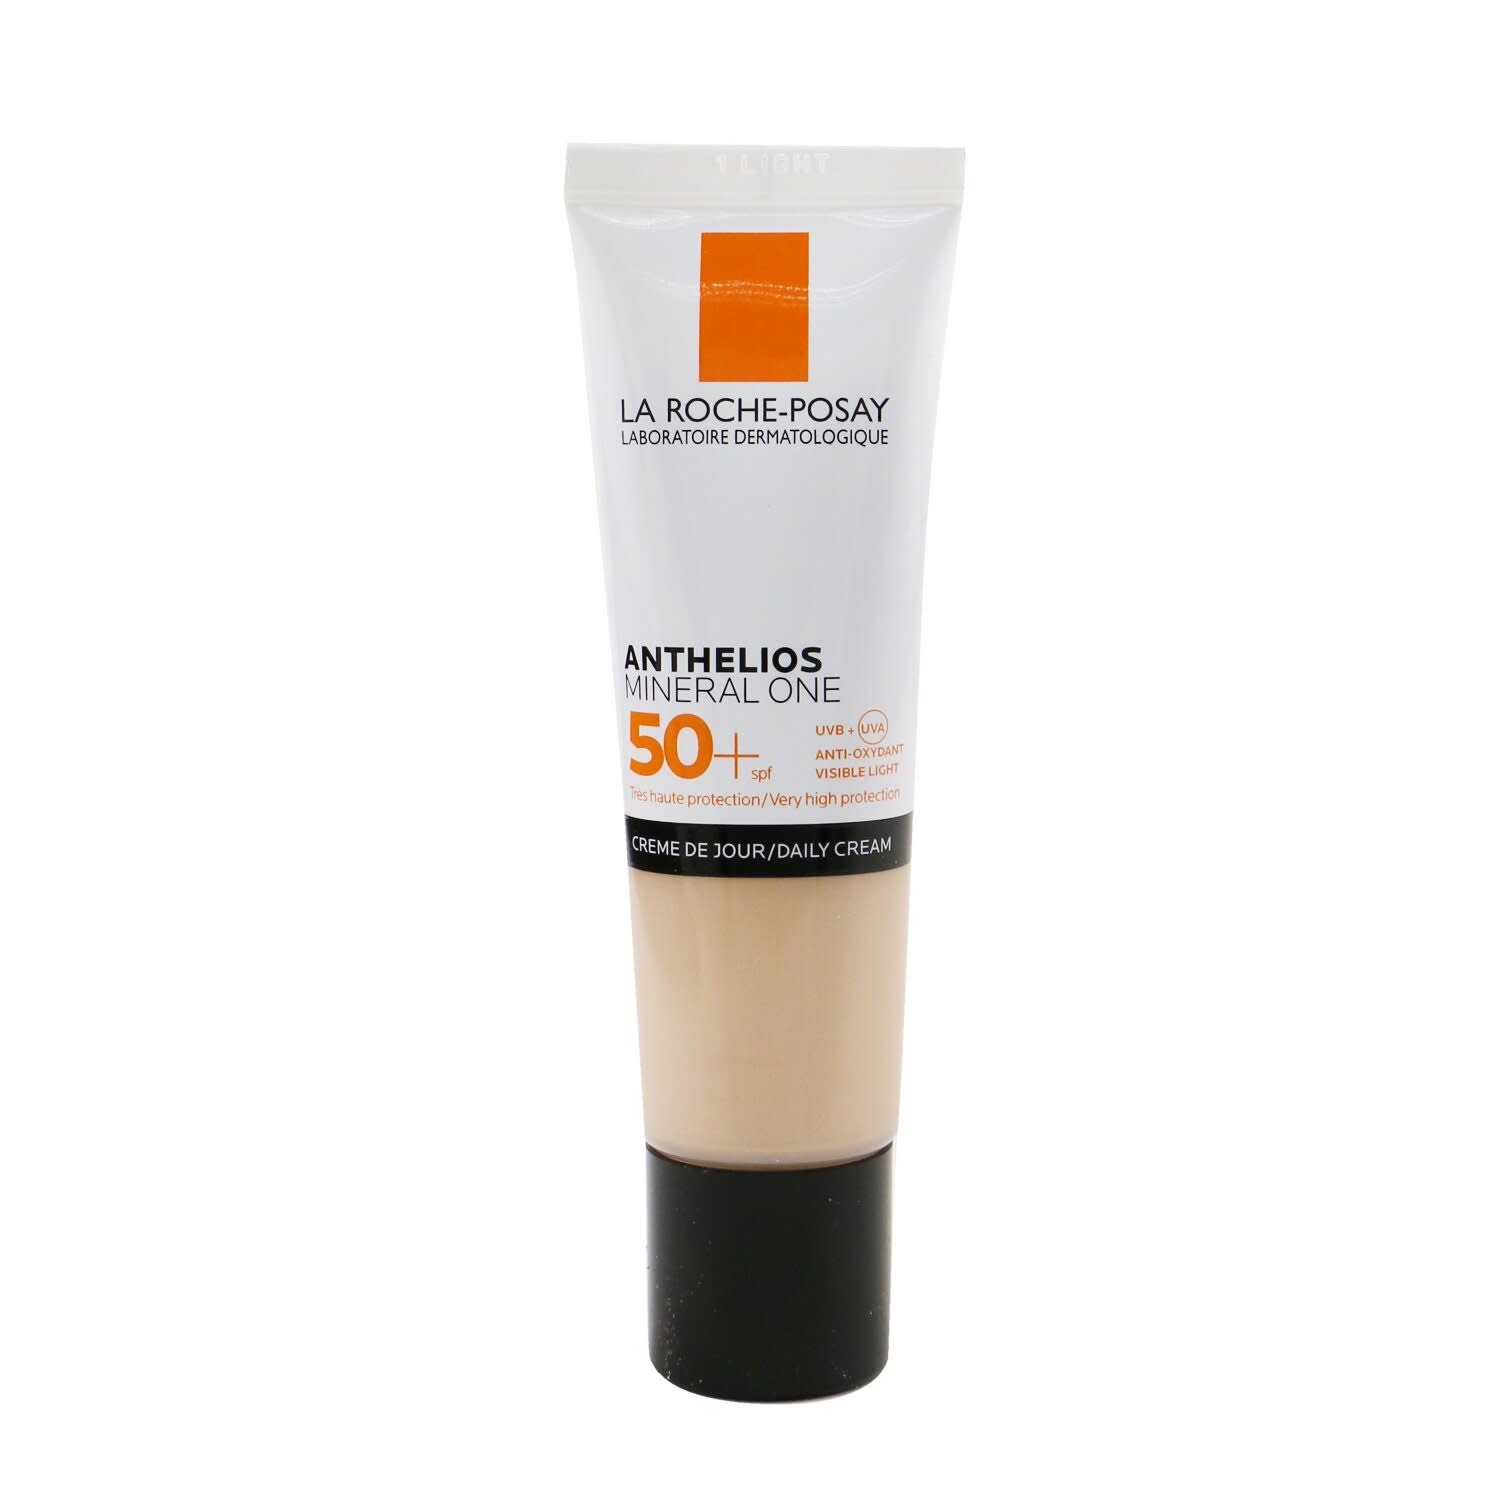 La Roche Posay Anthelios Mineral One Sunscreen